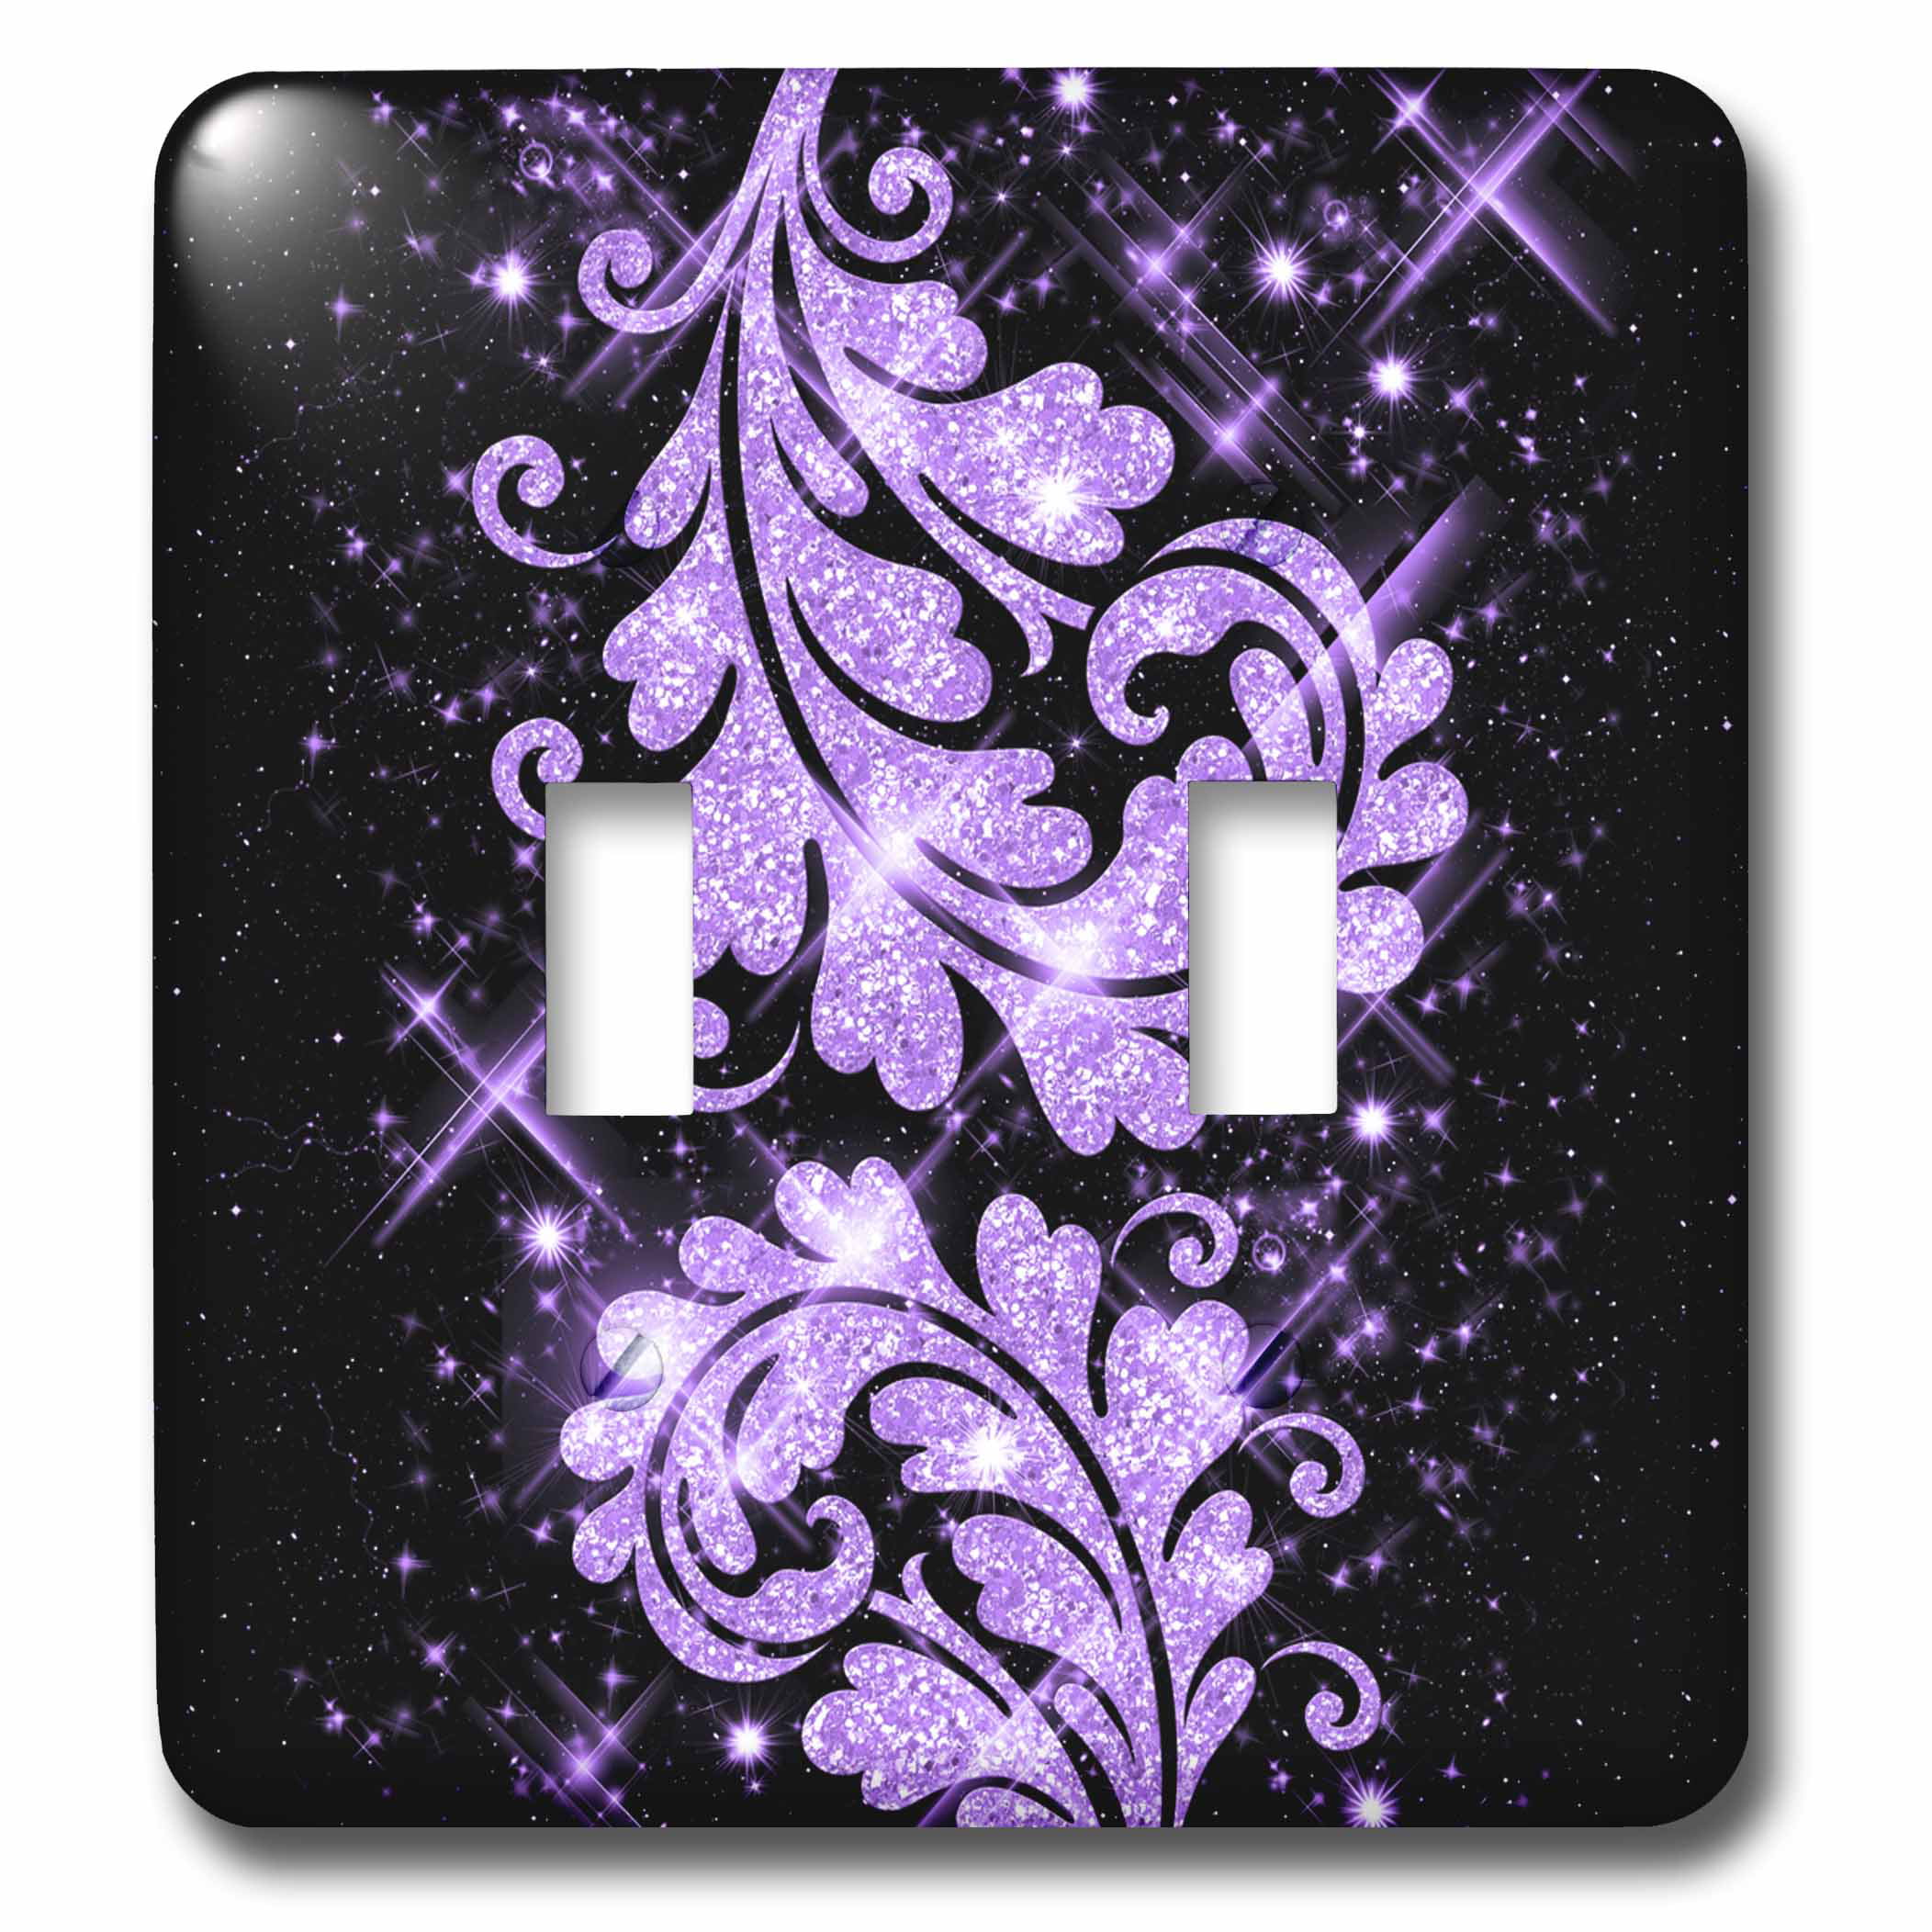 3dRose lsp_63064_2 Cosmic Dust Sparkles and Butterflies Double Toggle Switch